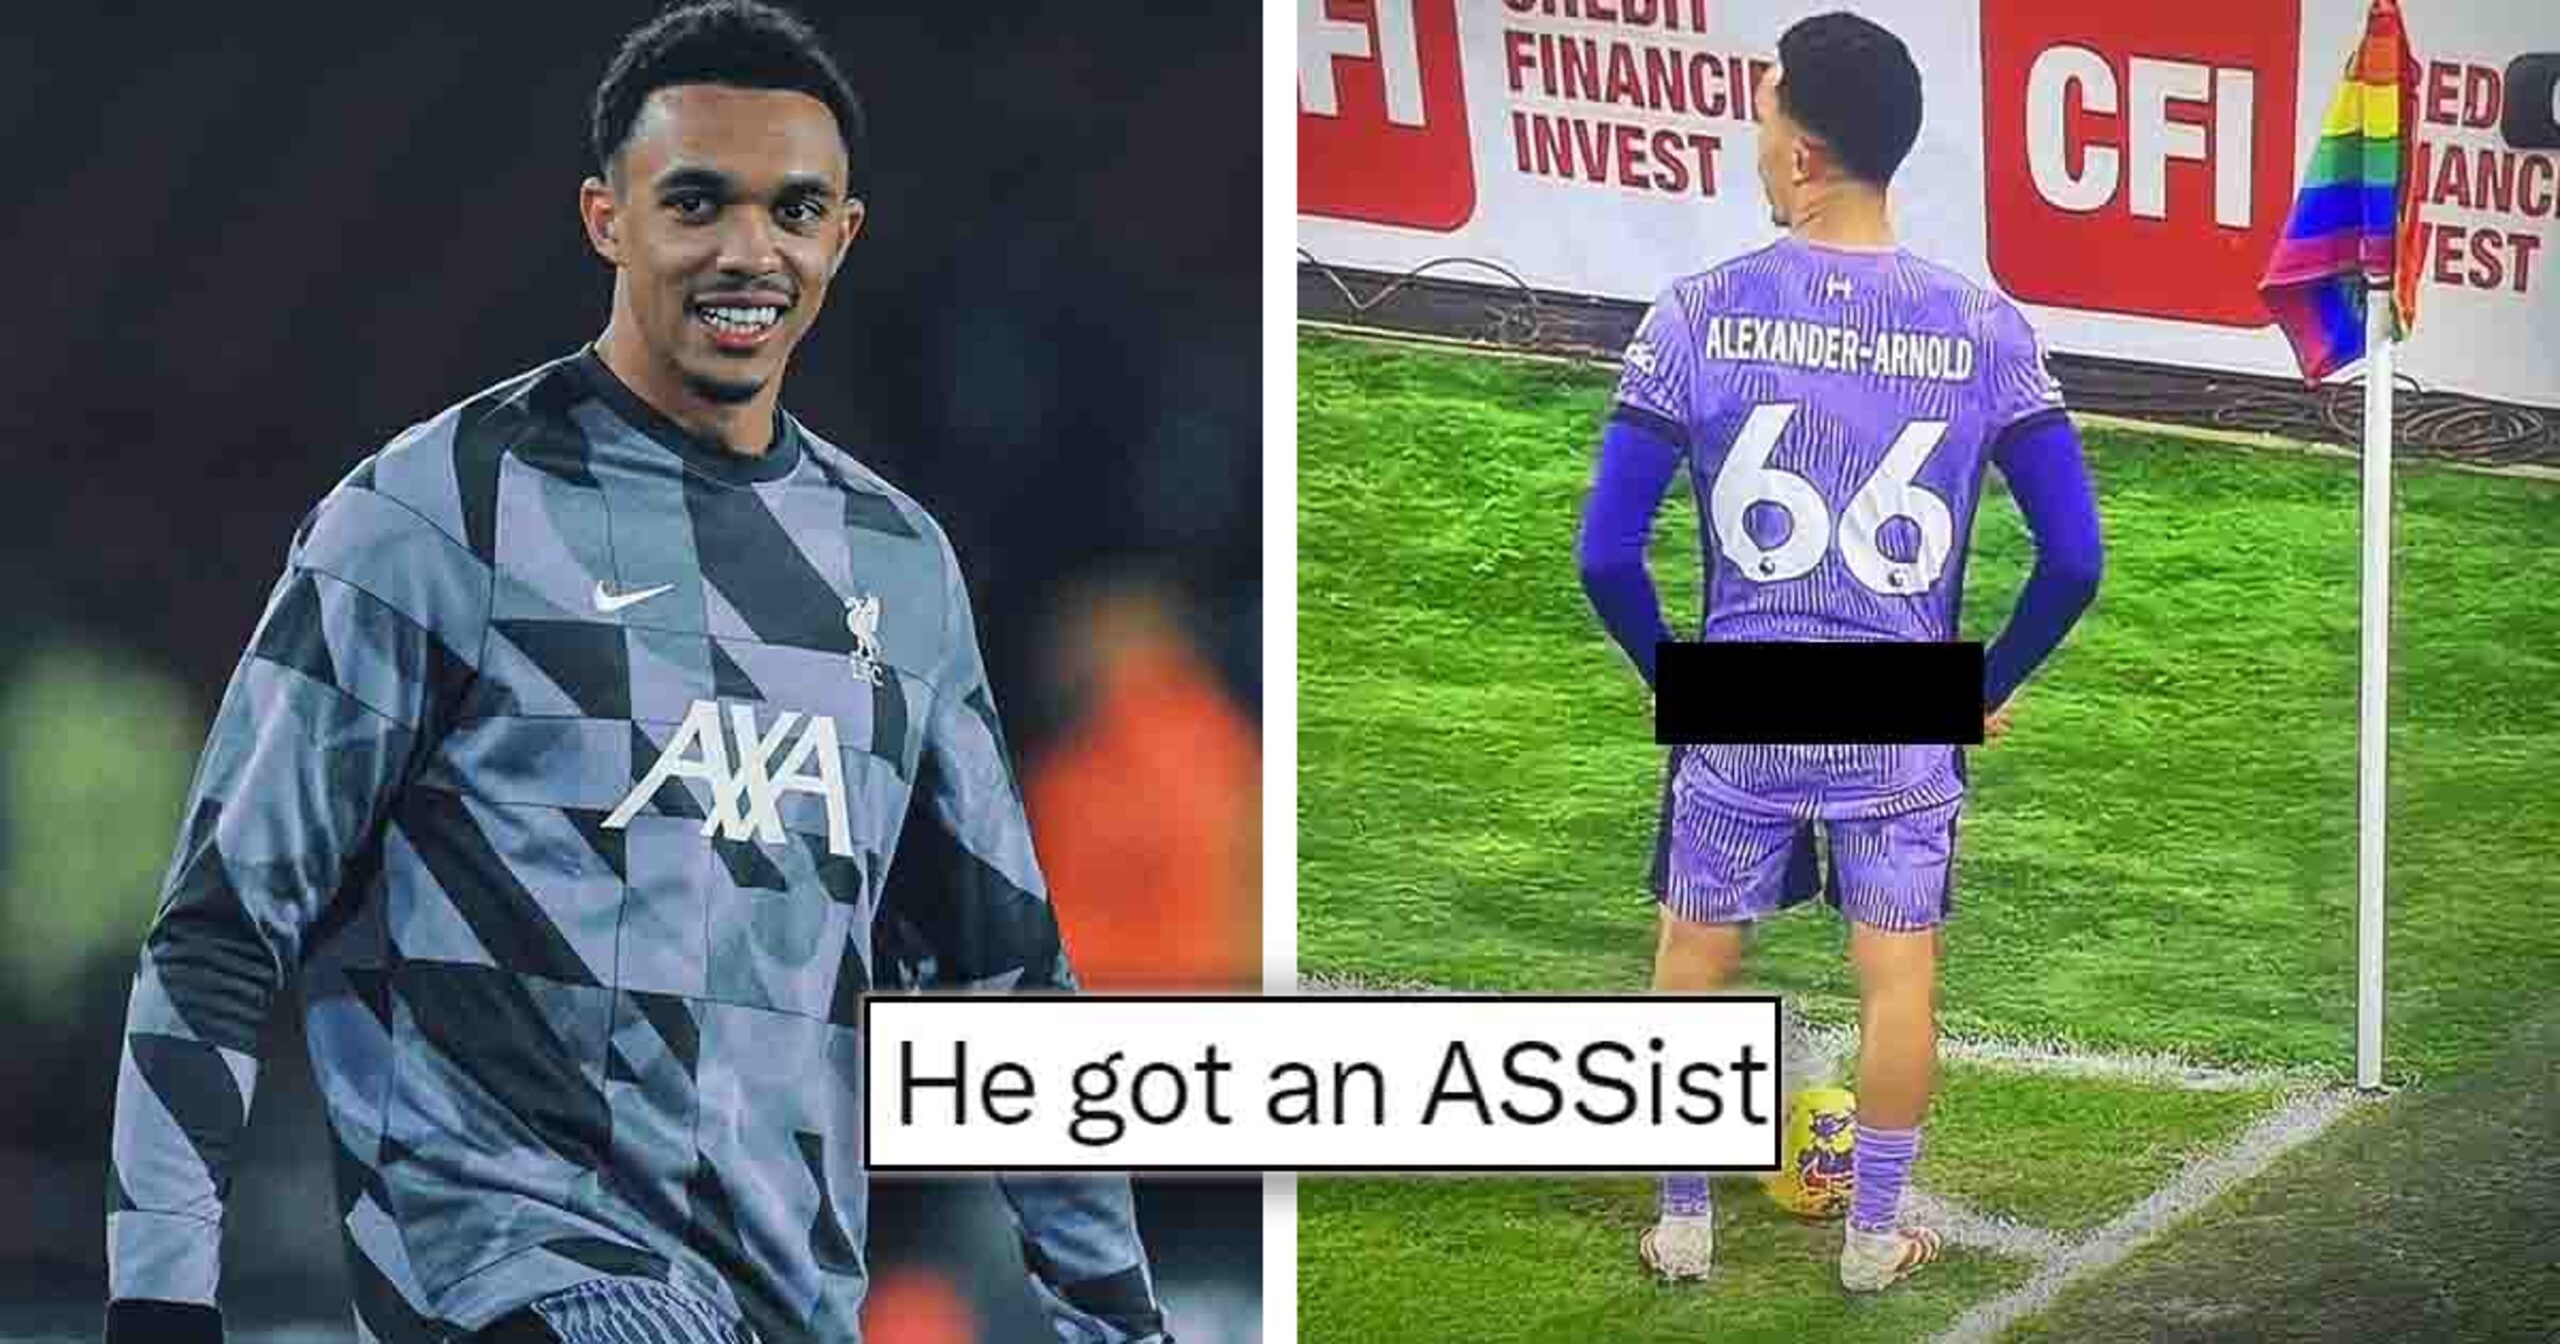 Twitter Reacts To Trent Alexander Arnold Exposing His Buttcrack On The Pitch